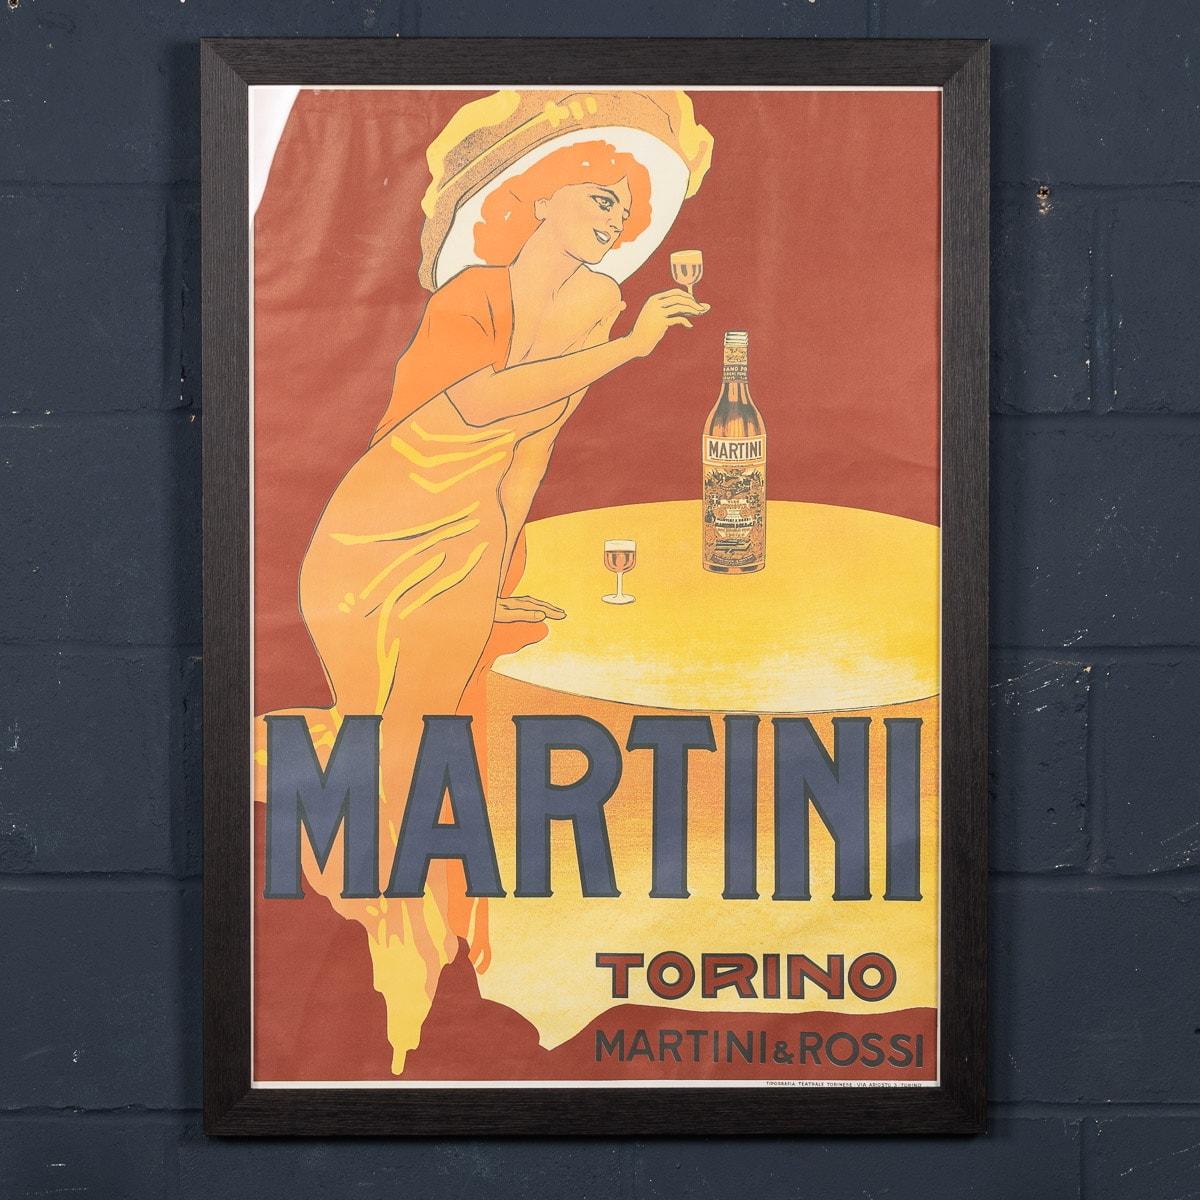 The poster features a well dressed, elegant woman in a long dress and large hat. She is holding a glass of Martini toasting her companion who is not part of the poster. The Martini bottle, whose label is meticulously reproduced, is standing on the